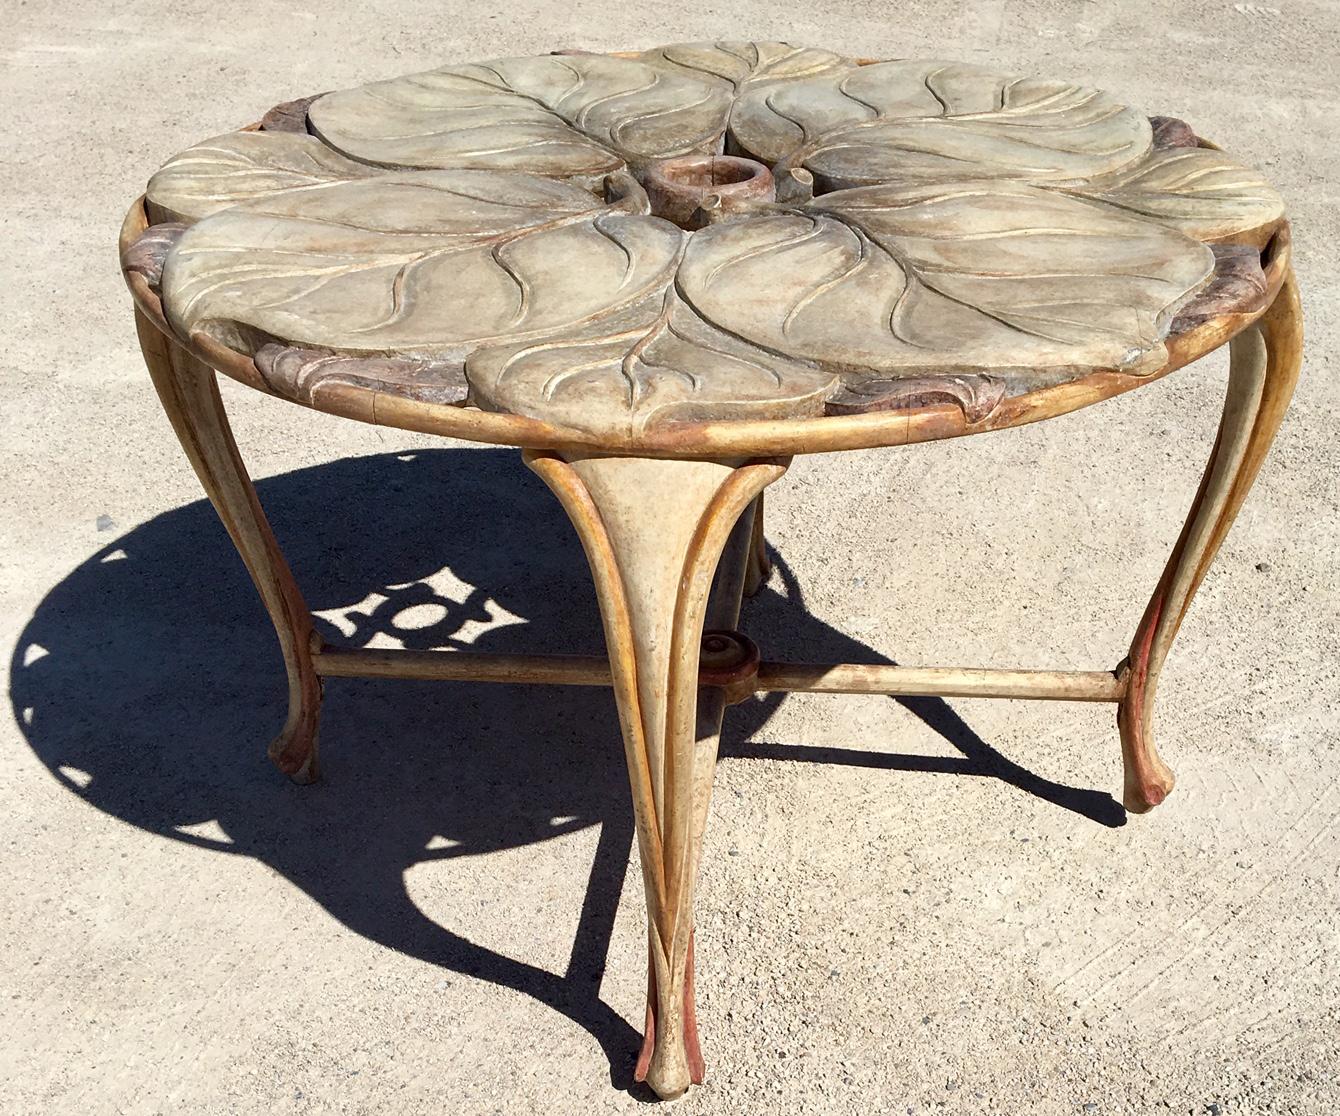 Unique vintage round dining table made of carved wood, Italy, 1970s. The tabletop is decorated with large carved leafs.